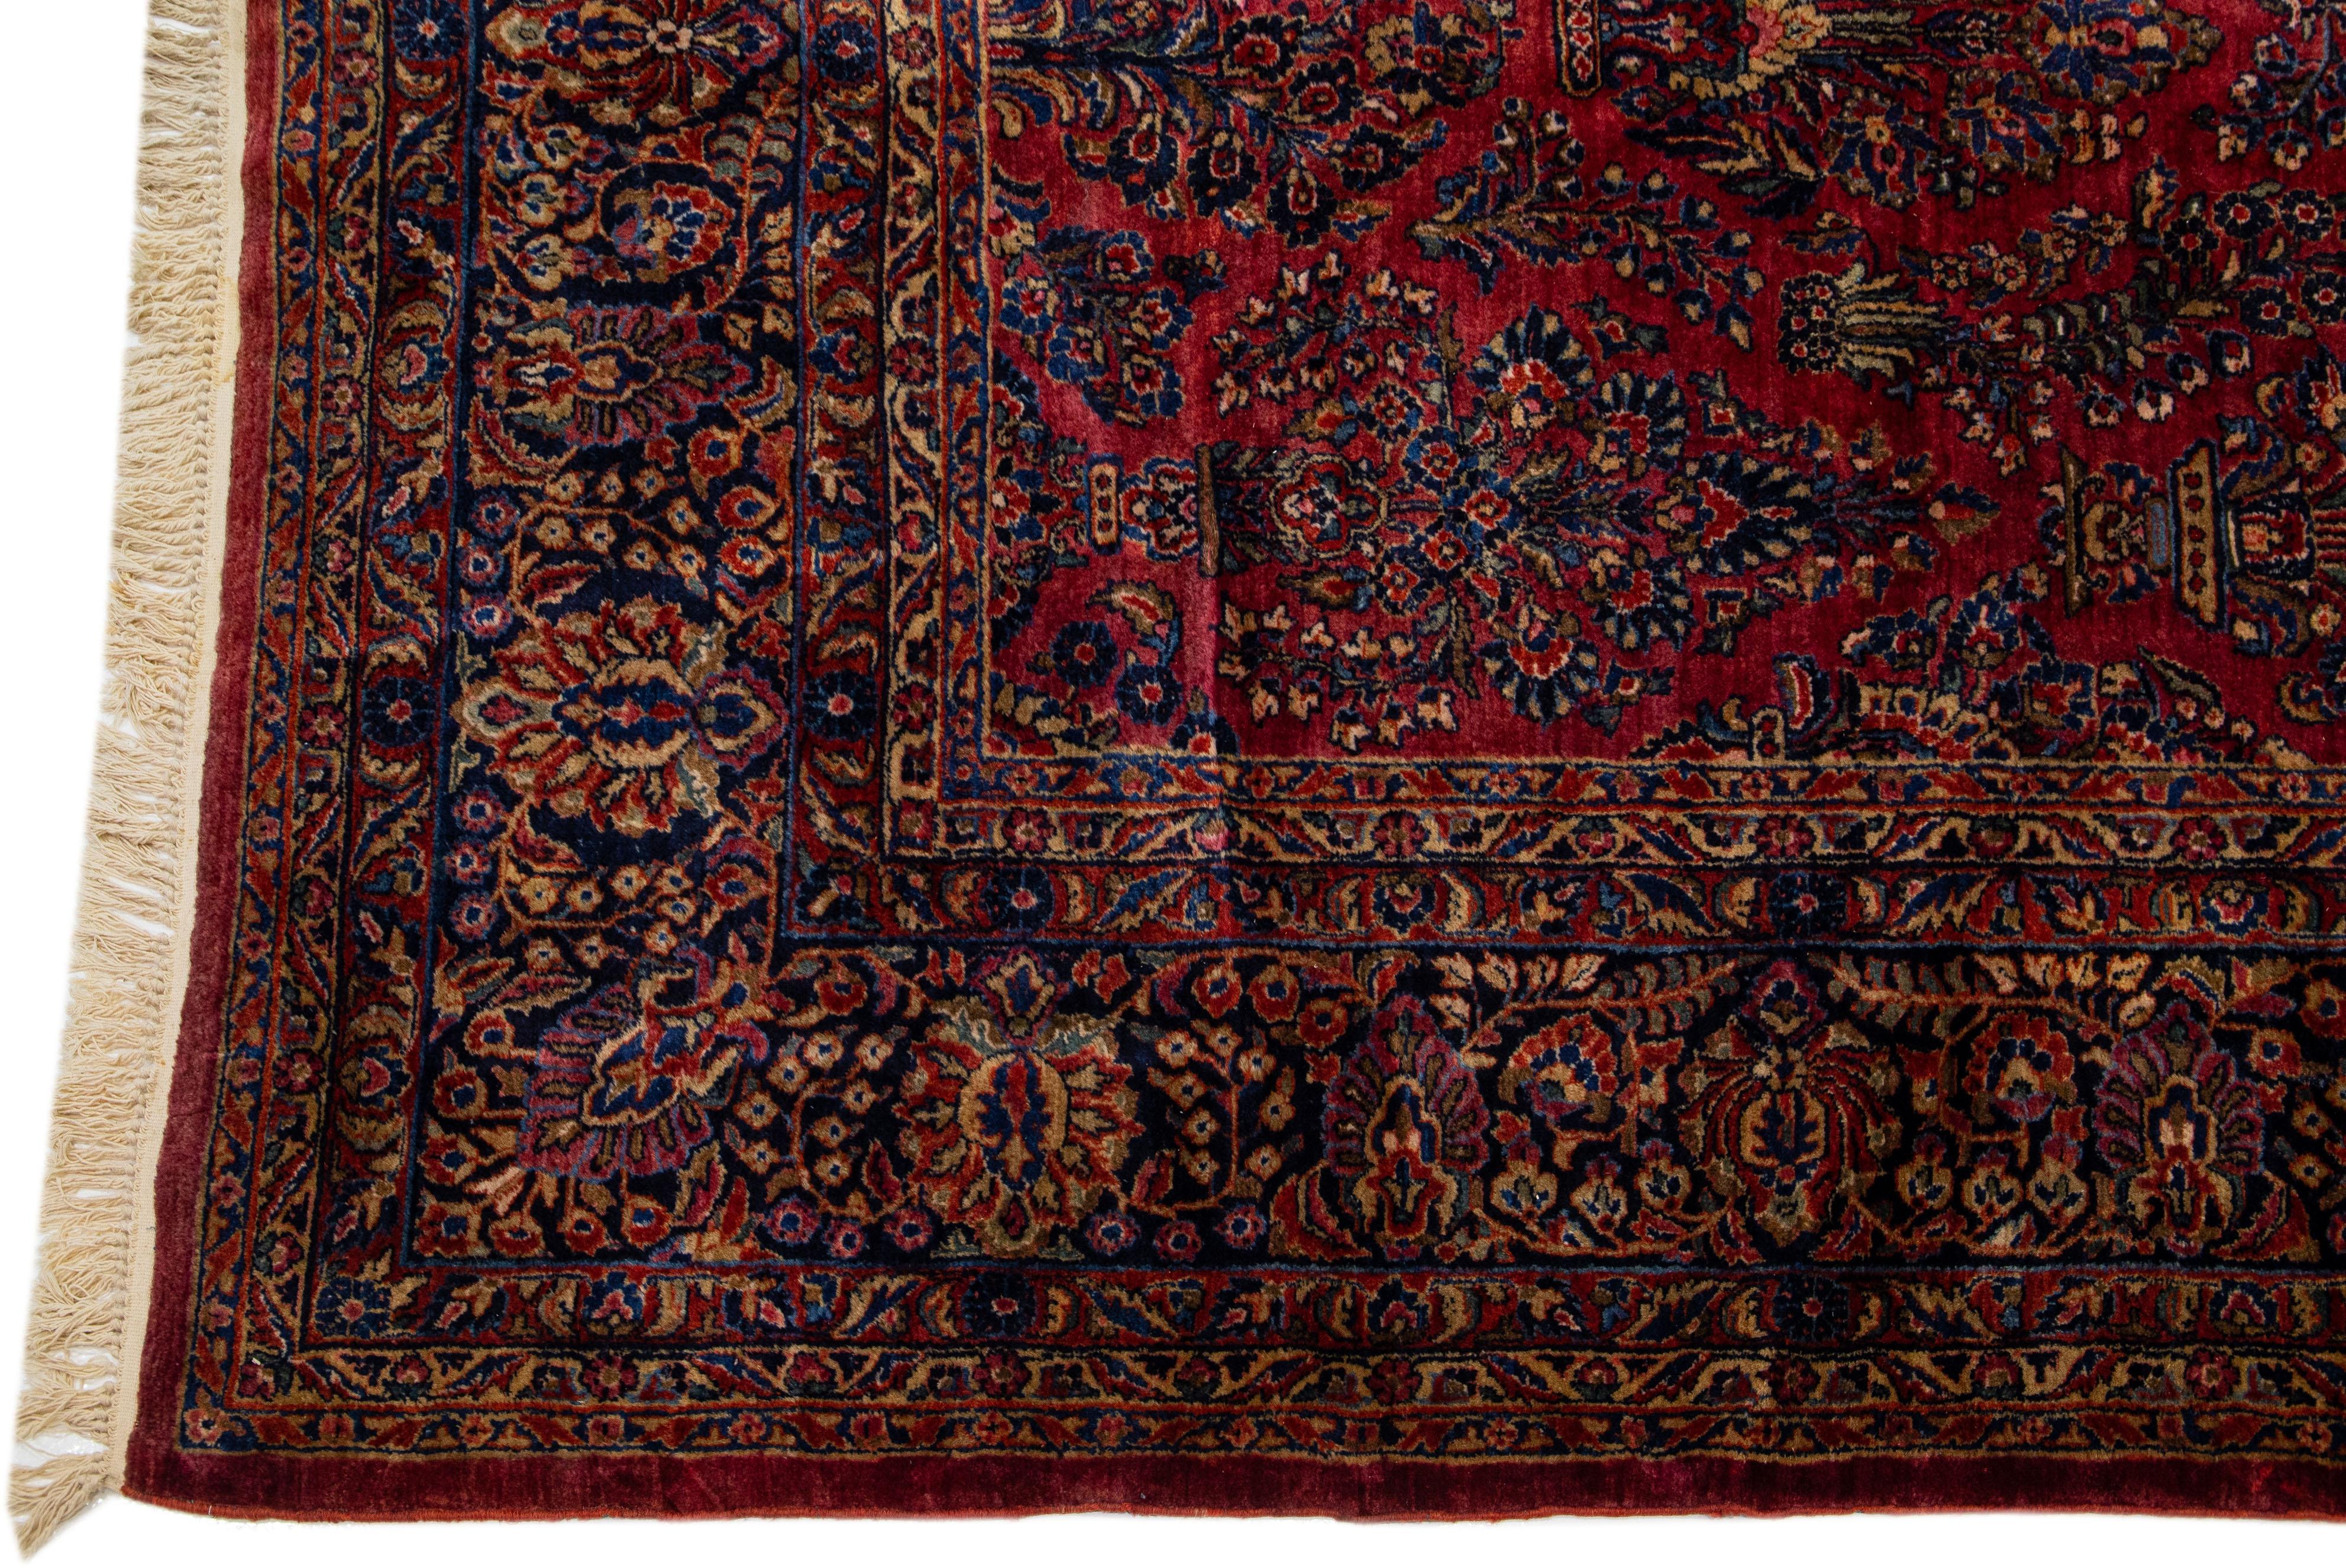 Antique Oversize Persian Sarouk Wool Rug with Classic Floral Design in Red In Excellent Condition For Sale In Norwalk, CT